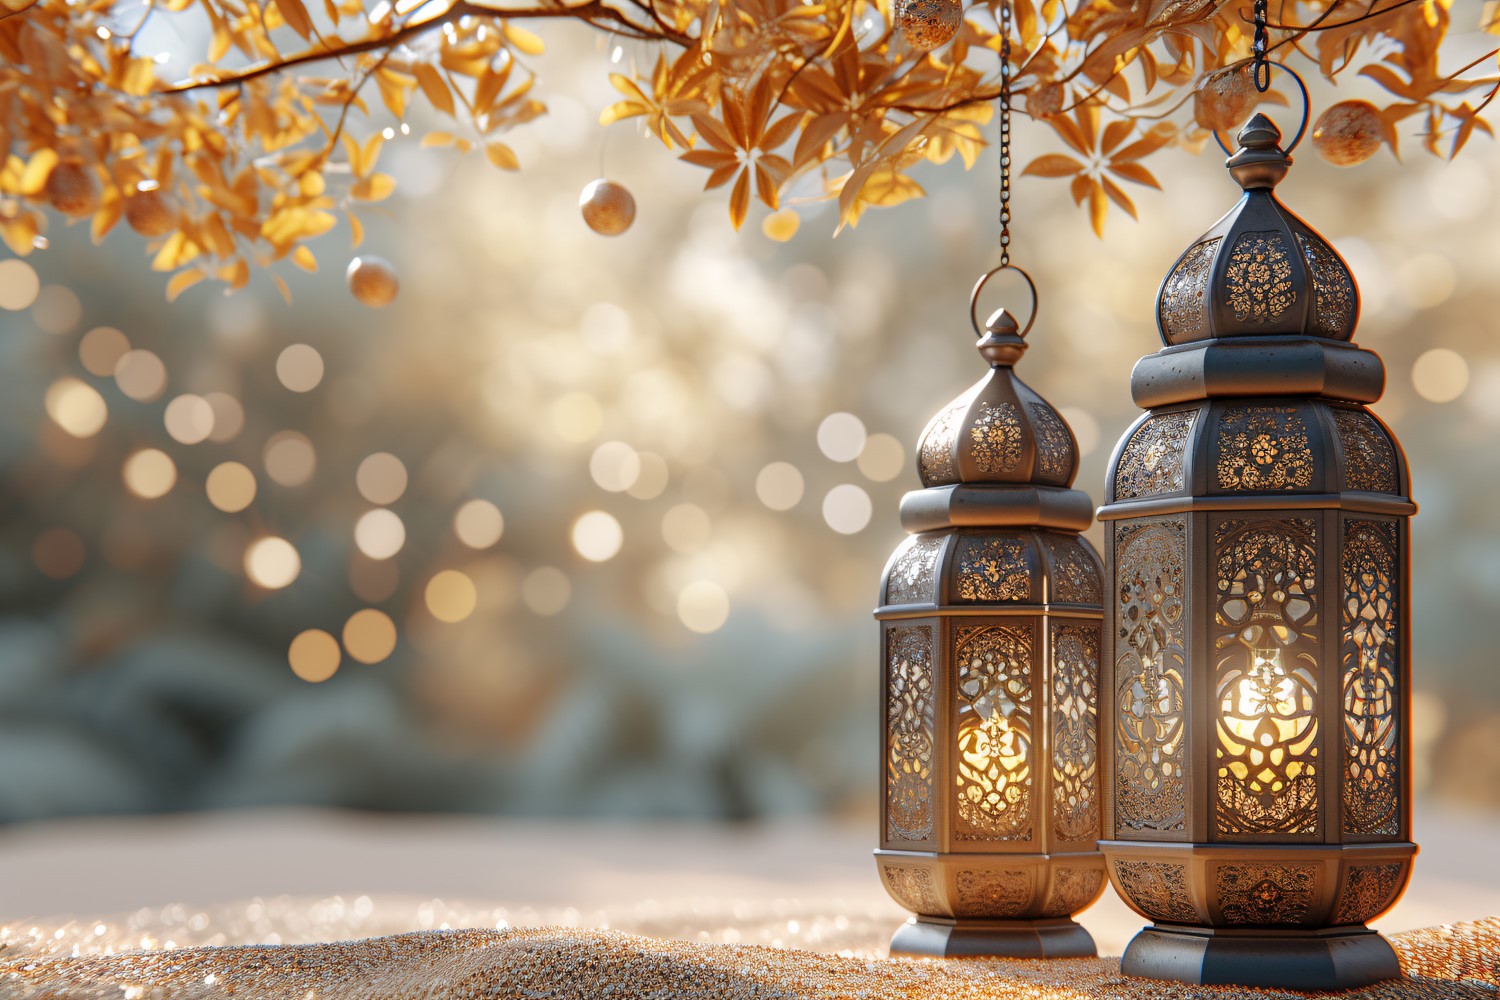 Ramadan greeting banner design with leaves and lantern background